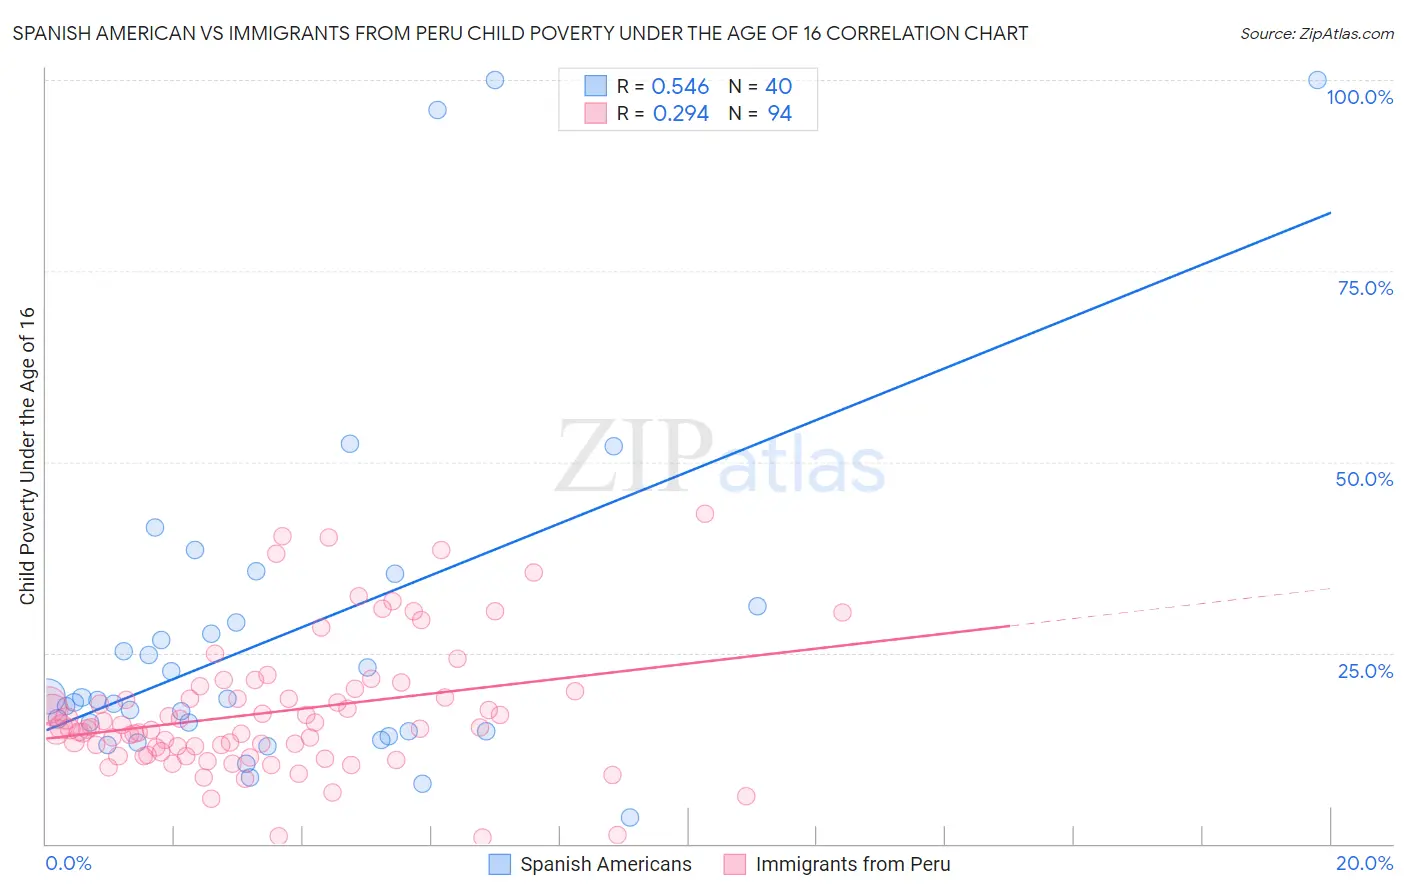 Spanish American vs Immigrants from Peru Child Poverty Under the Age of 16